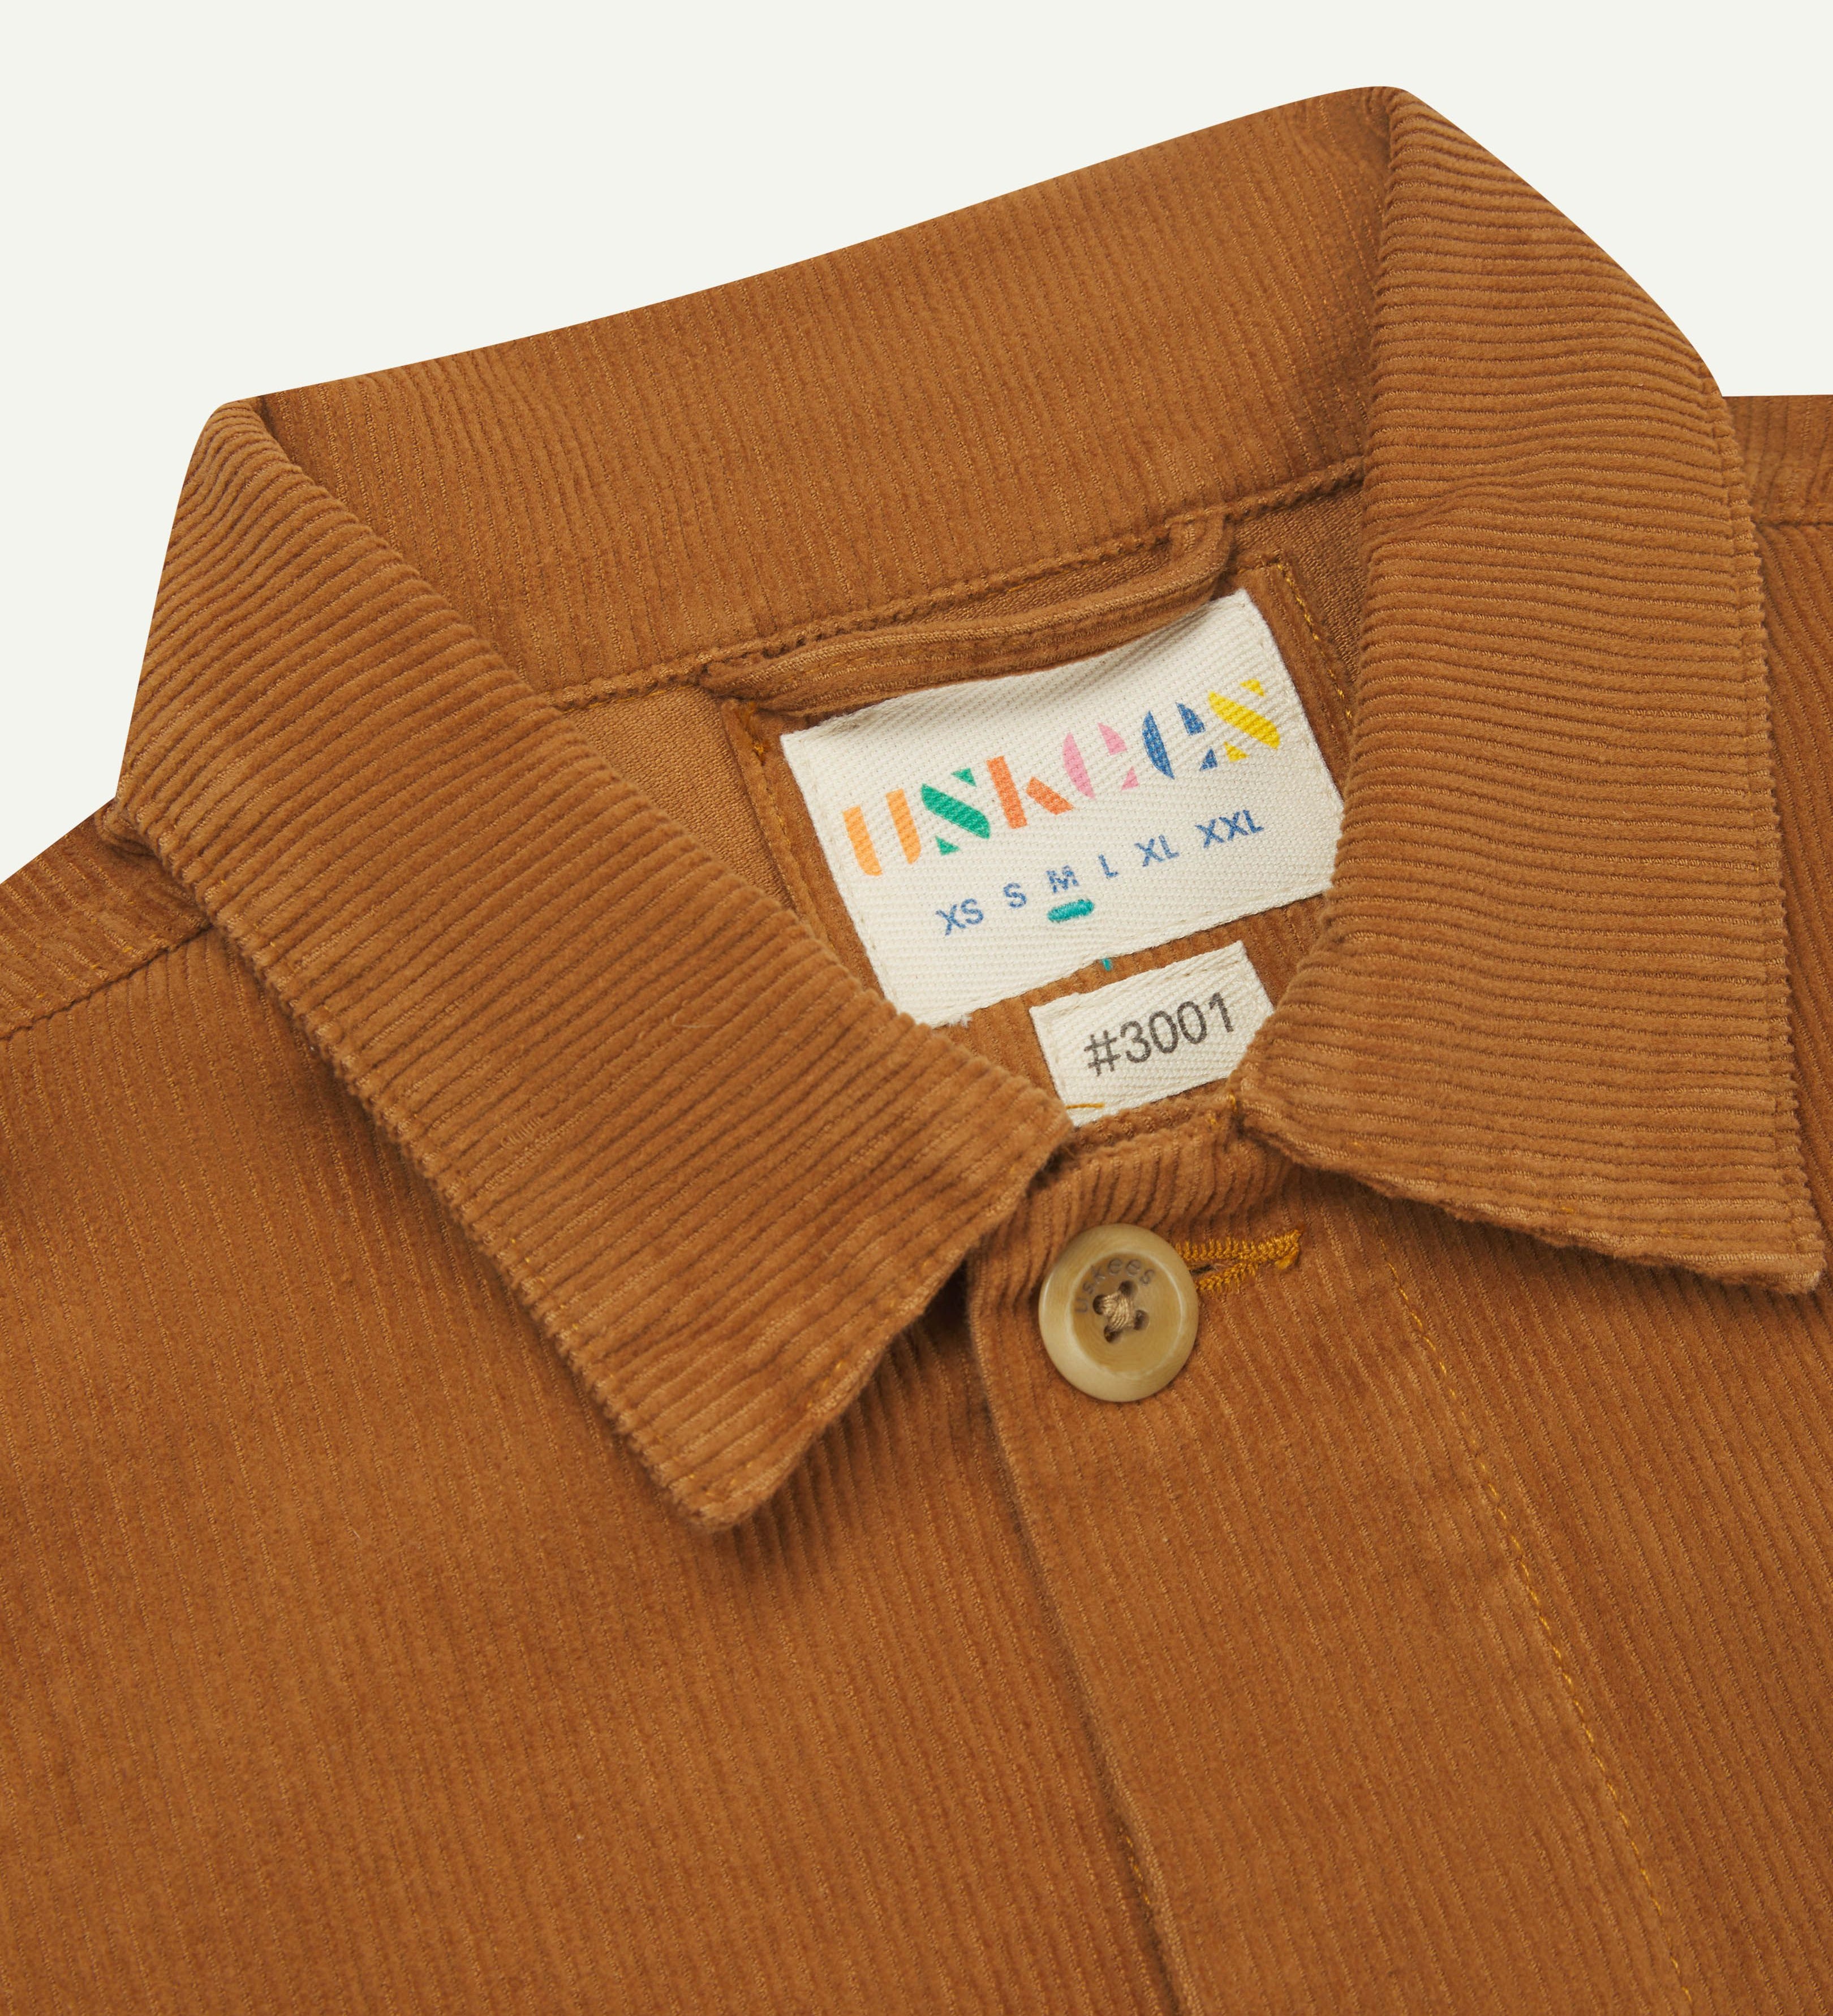  front close-up shot of Uskees tan corduroy #3001 over-shirt clearly showing collar and inner size label